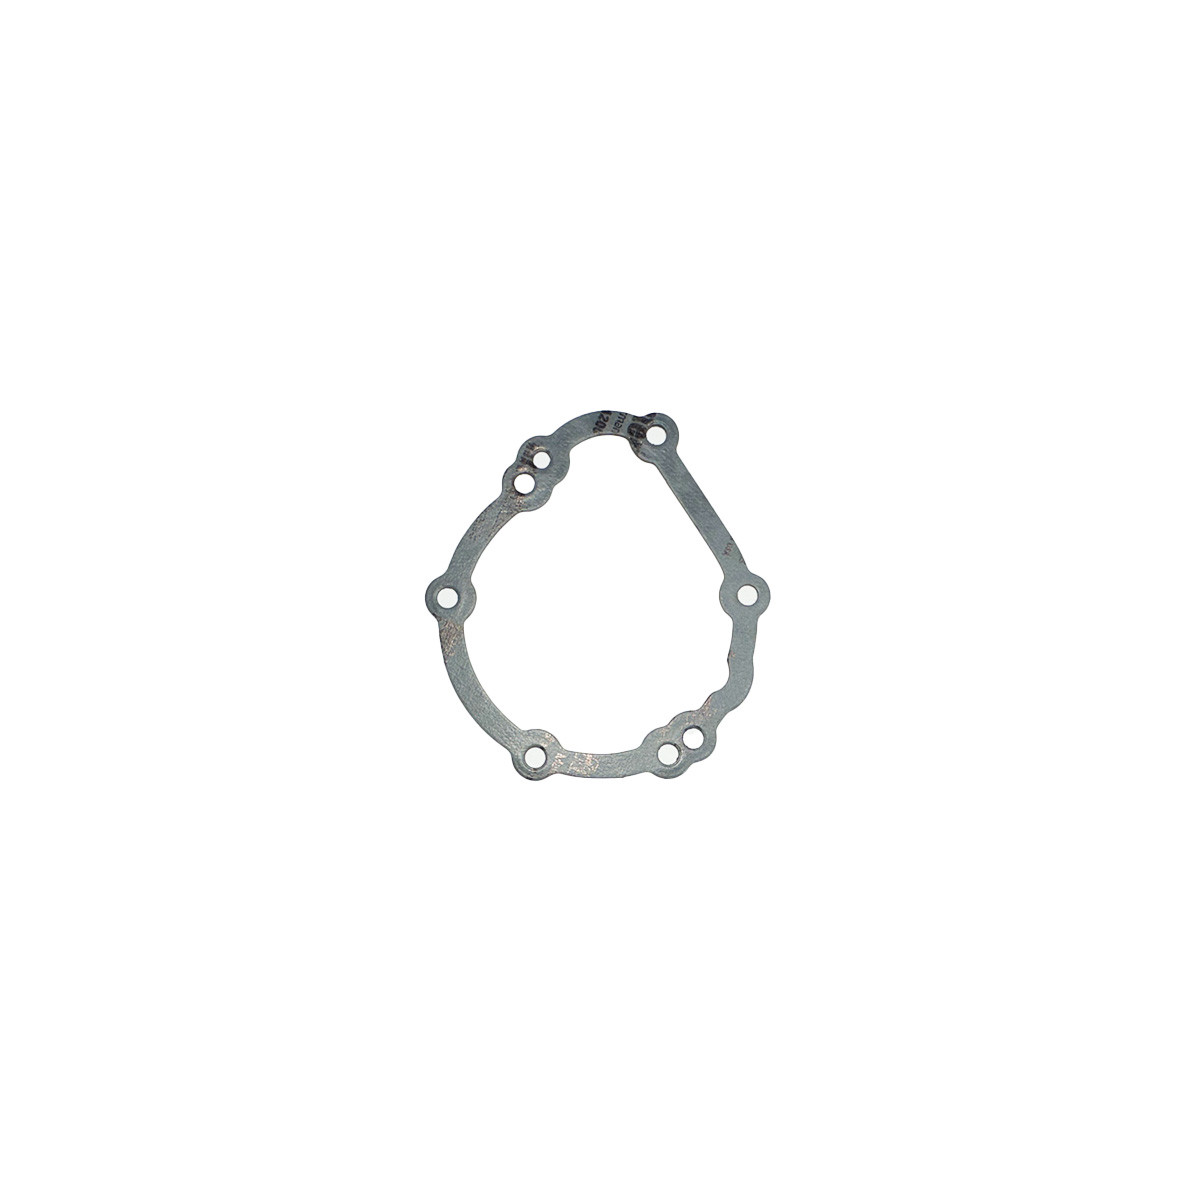 T1264050, Gasket, Starter Drive Cover